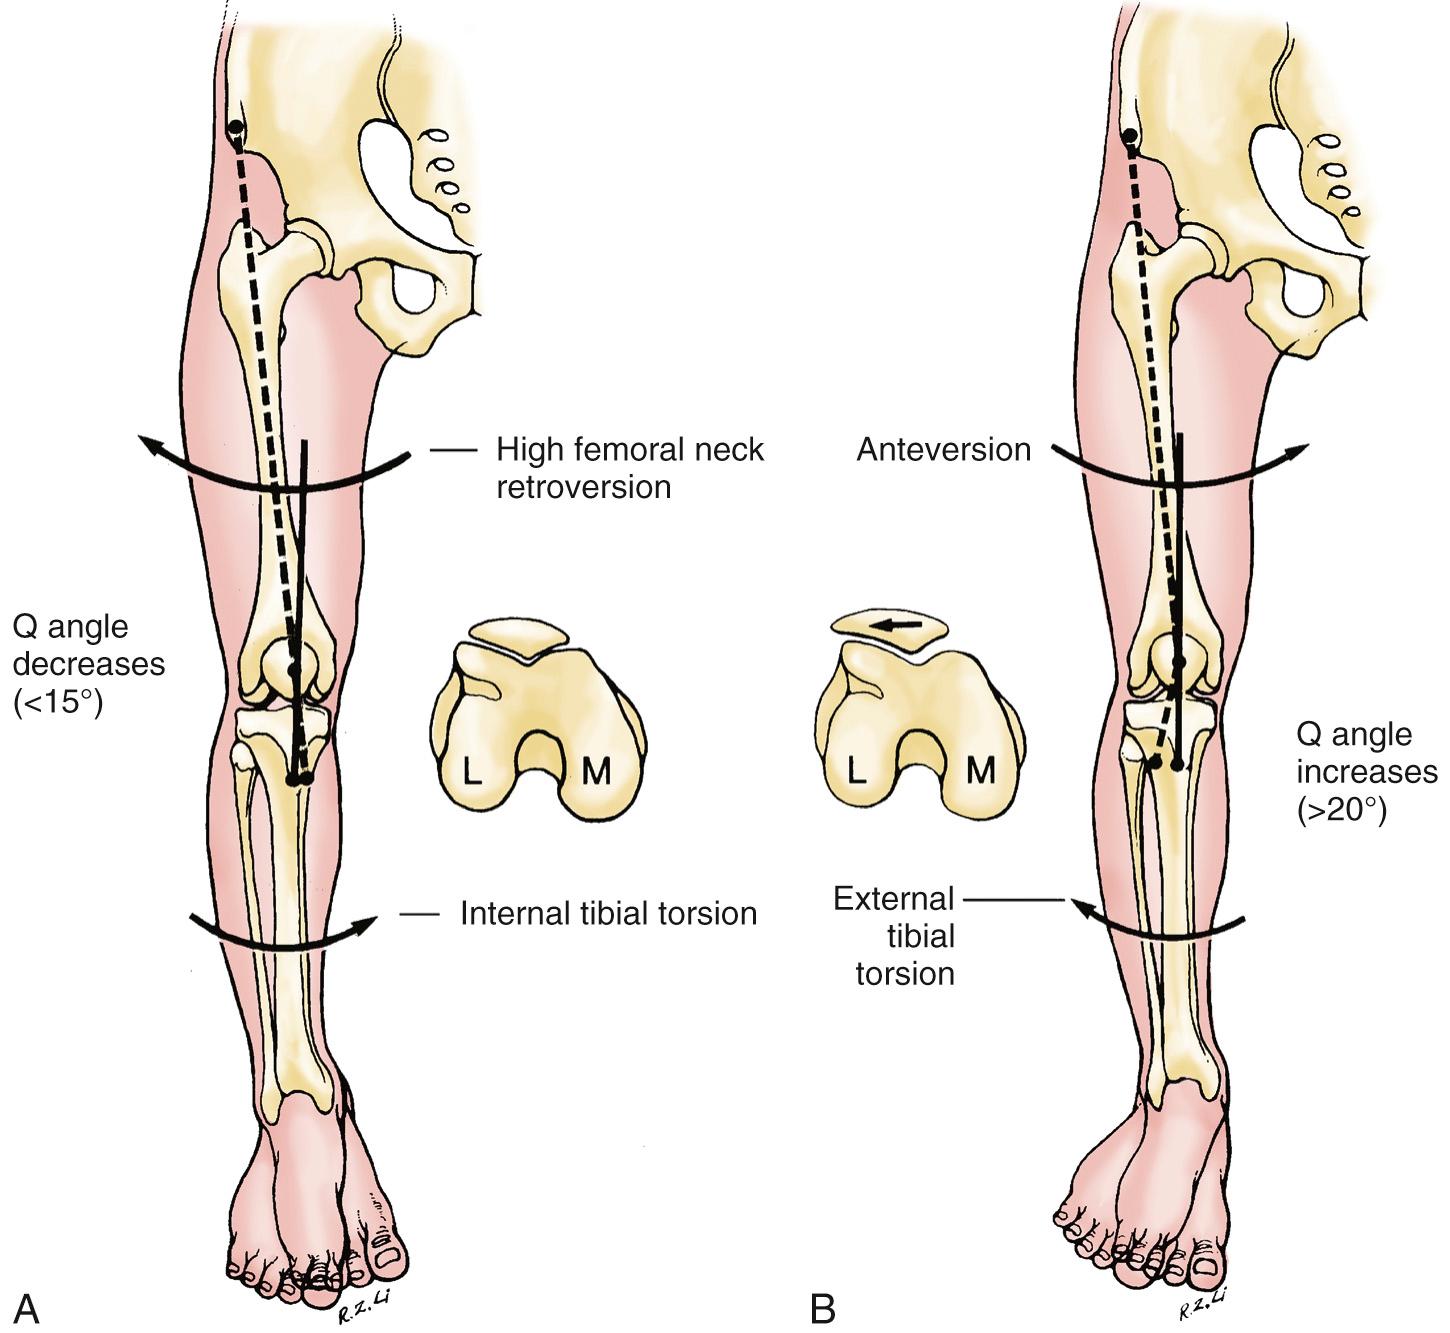 FIG 3.4, High femoral neck retroversion rotates the distal end of the femur externally. In combination with internal tibial torsion, the Q angle is decreased. Patellar tracking is improved, and patellofemoral sulcus alignment is normal. High femoral neck anteversion rotates the distal end of the femur internally. In combination with external tibial torsion, the Q angle is increased. Patellar tracking is compromised, and the patella tends to track laterally.